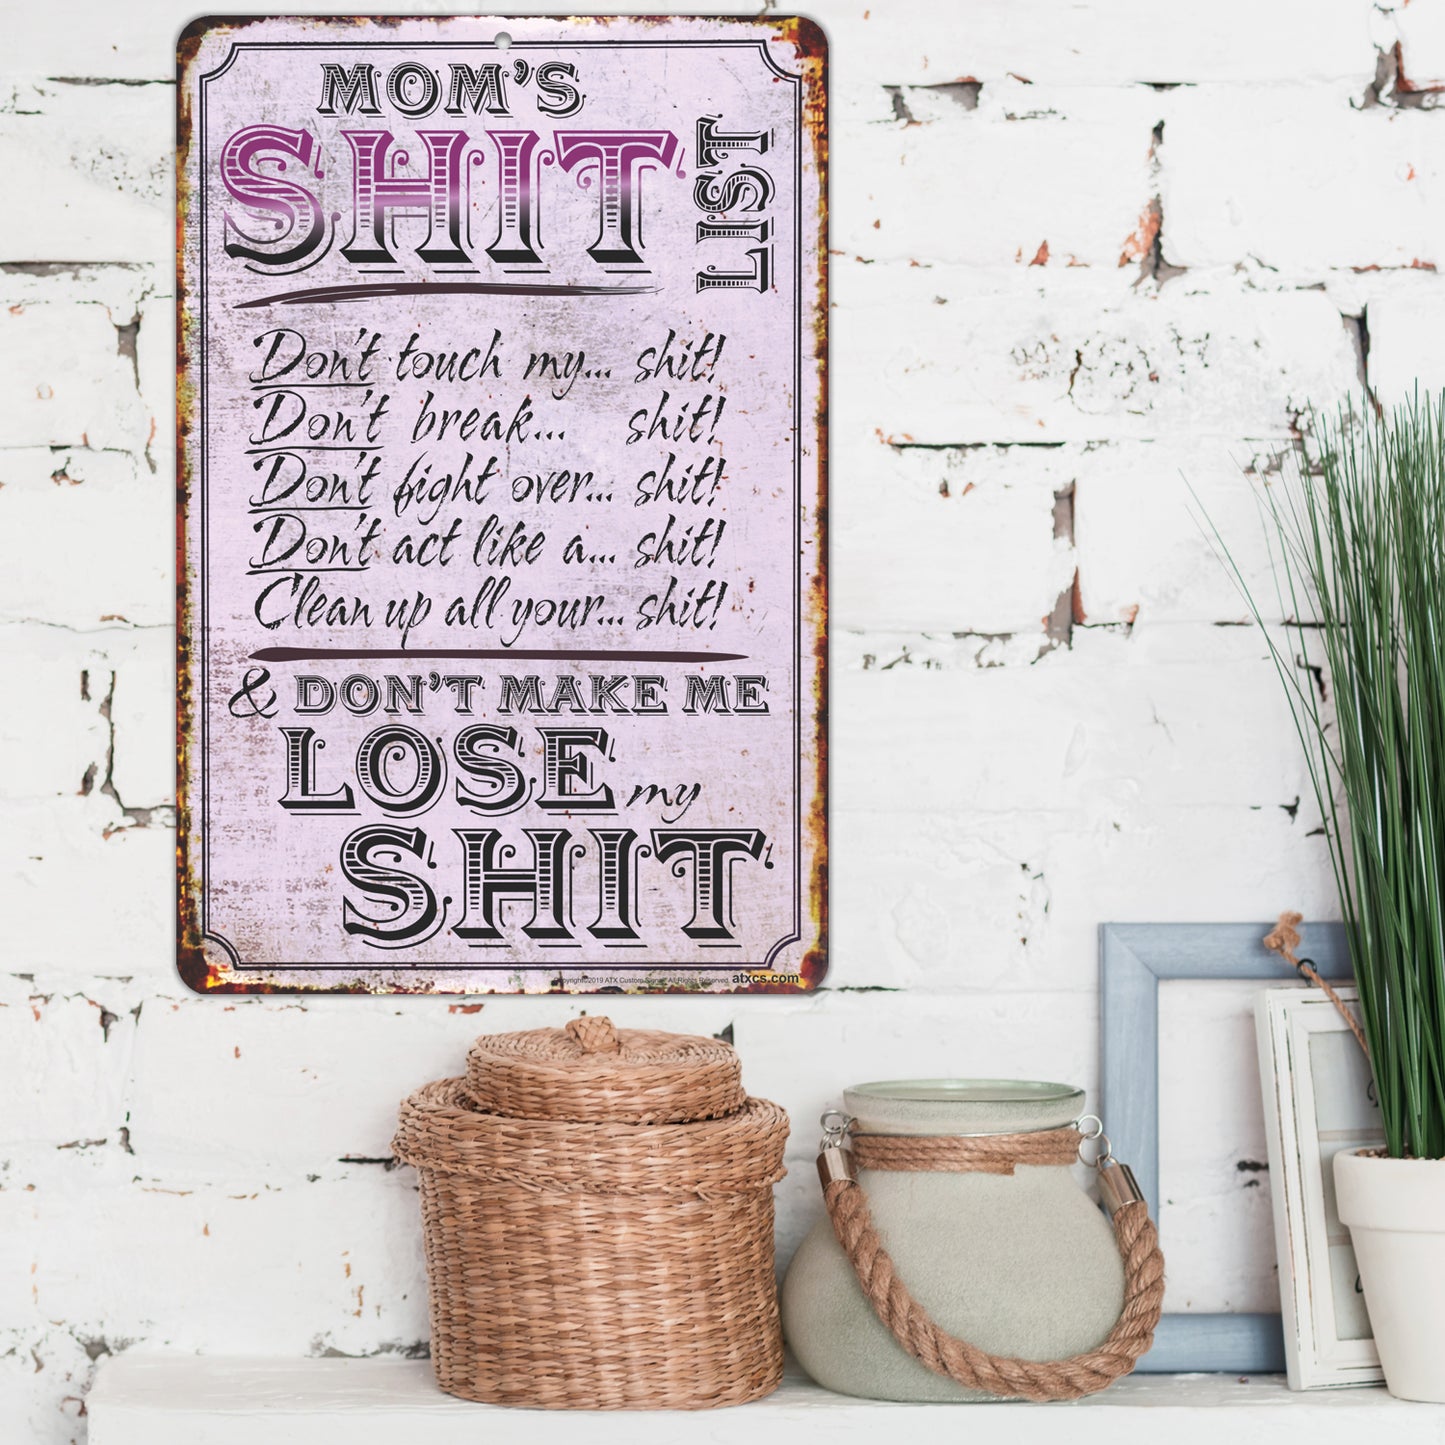 Funny Sign for Mom, Mom's Shit List! - Size 8 x 12